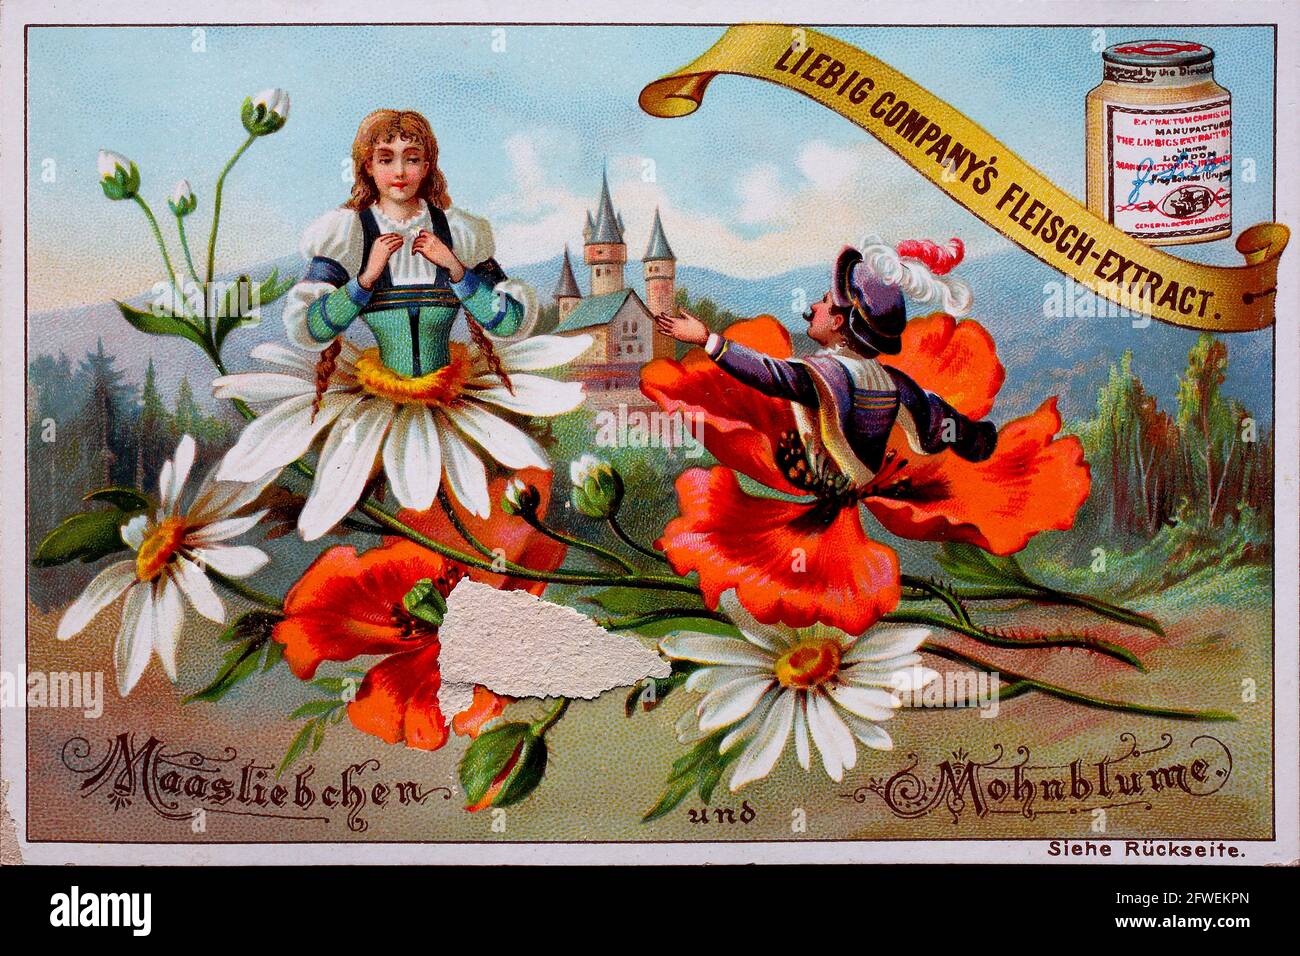 Flowers and people series, Massliebchen and poppy flower  /  Serie Blumen und Menschen, Massliebchen und Mohnblume, Liebigbild, digital improved reproduction of a collectible image from the Liebig company, estimated from 1900, pd  /  digital verbesserte Reproduktion eines Sammelbildes von ca 1900, gemeinfrei, Stock Photo